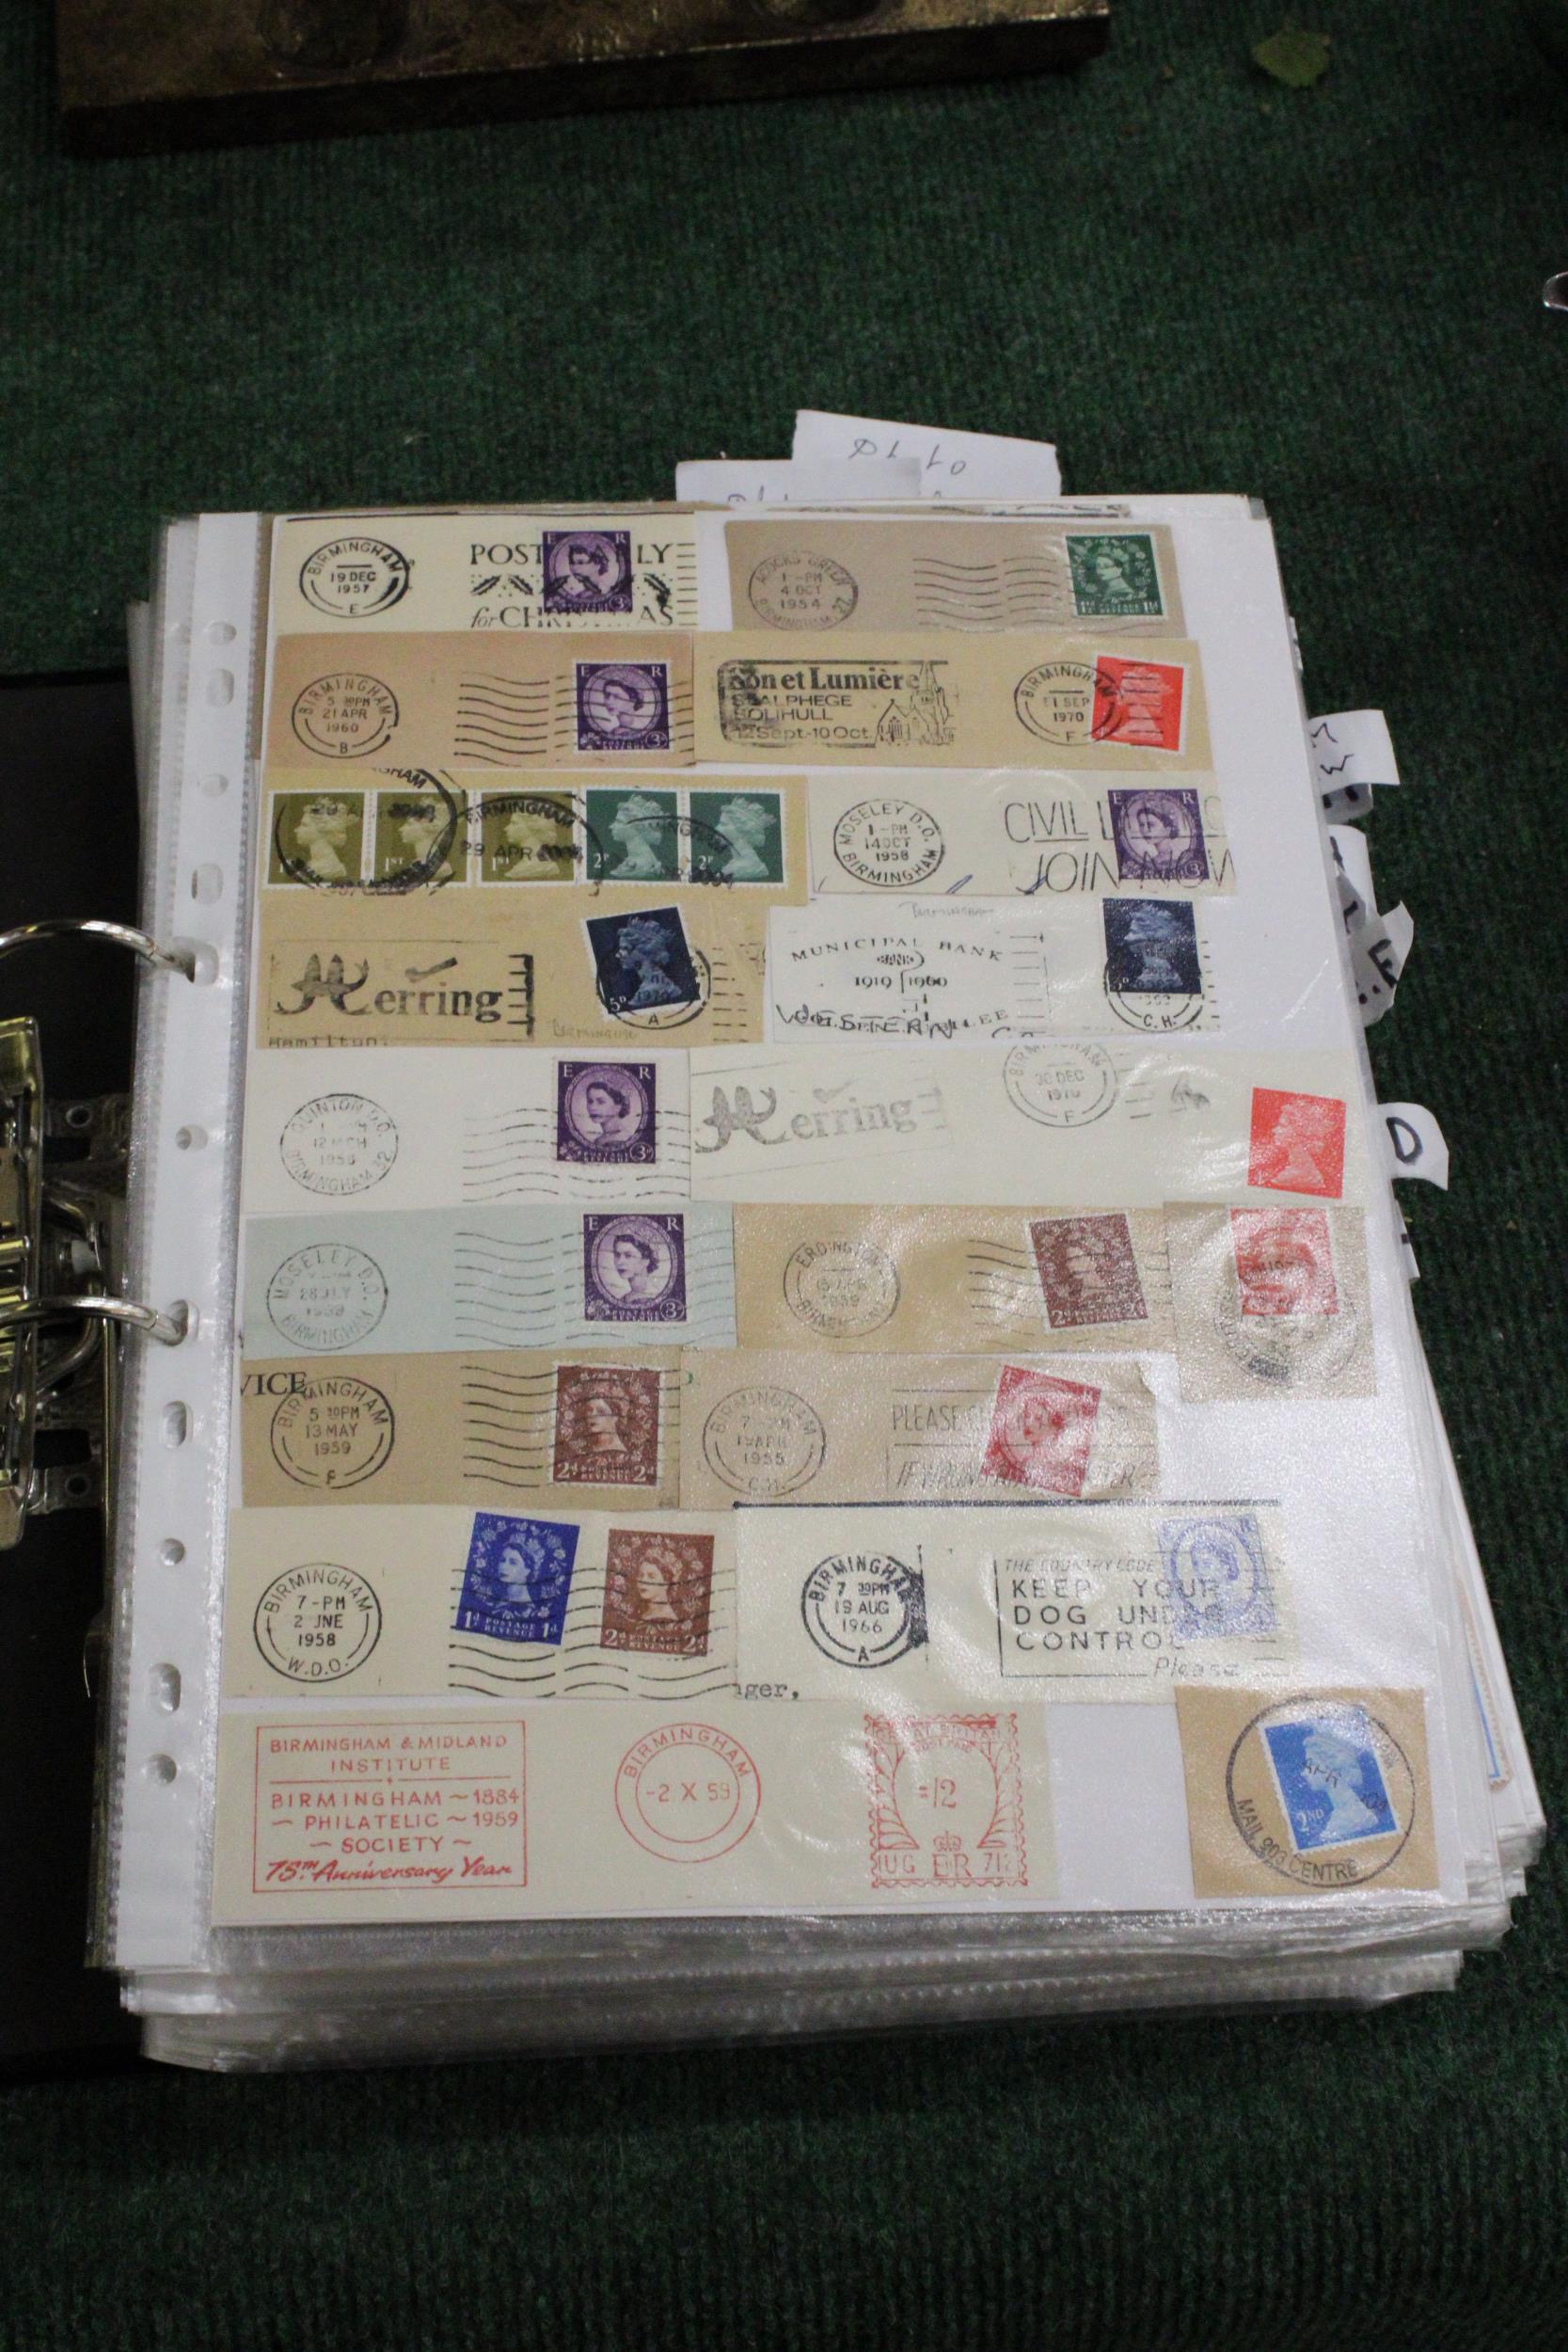 AN ALBUM CONTAINING A COLLECTION OF POSTAL HISTORY STAMPS - Image 2 of 5